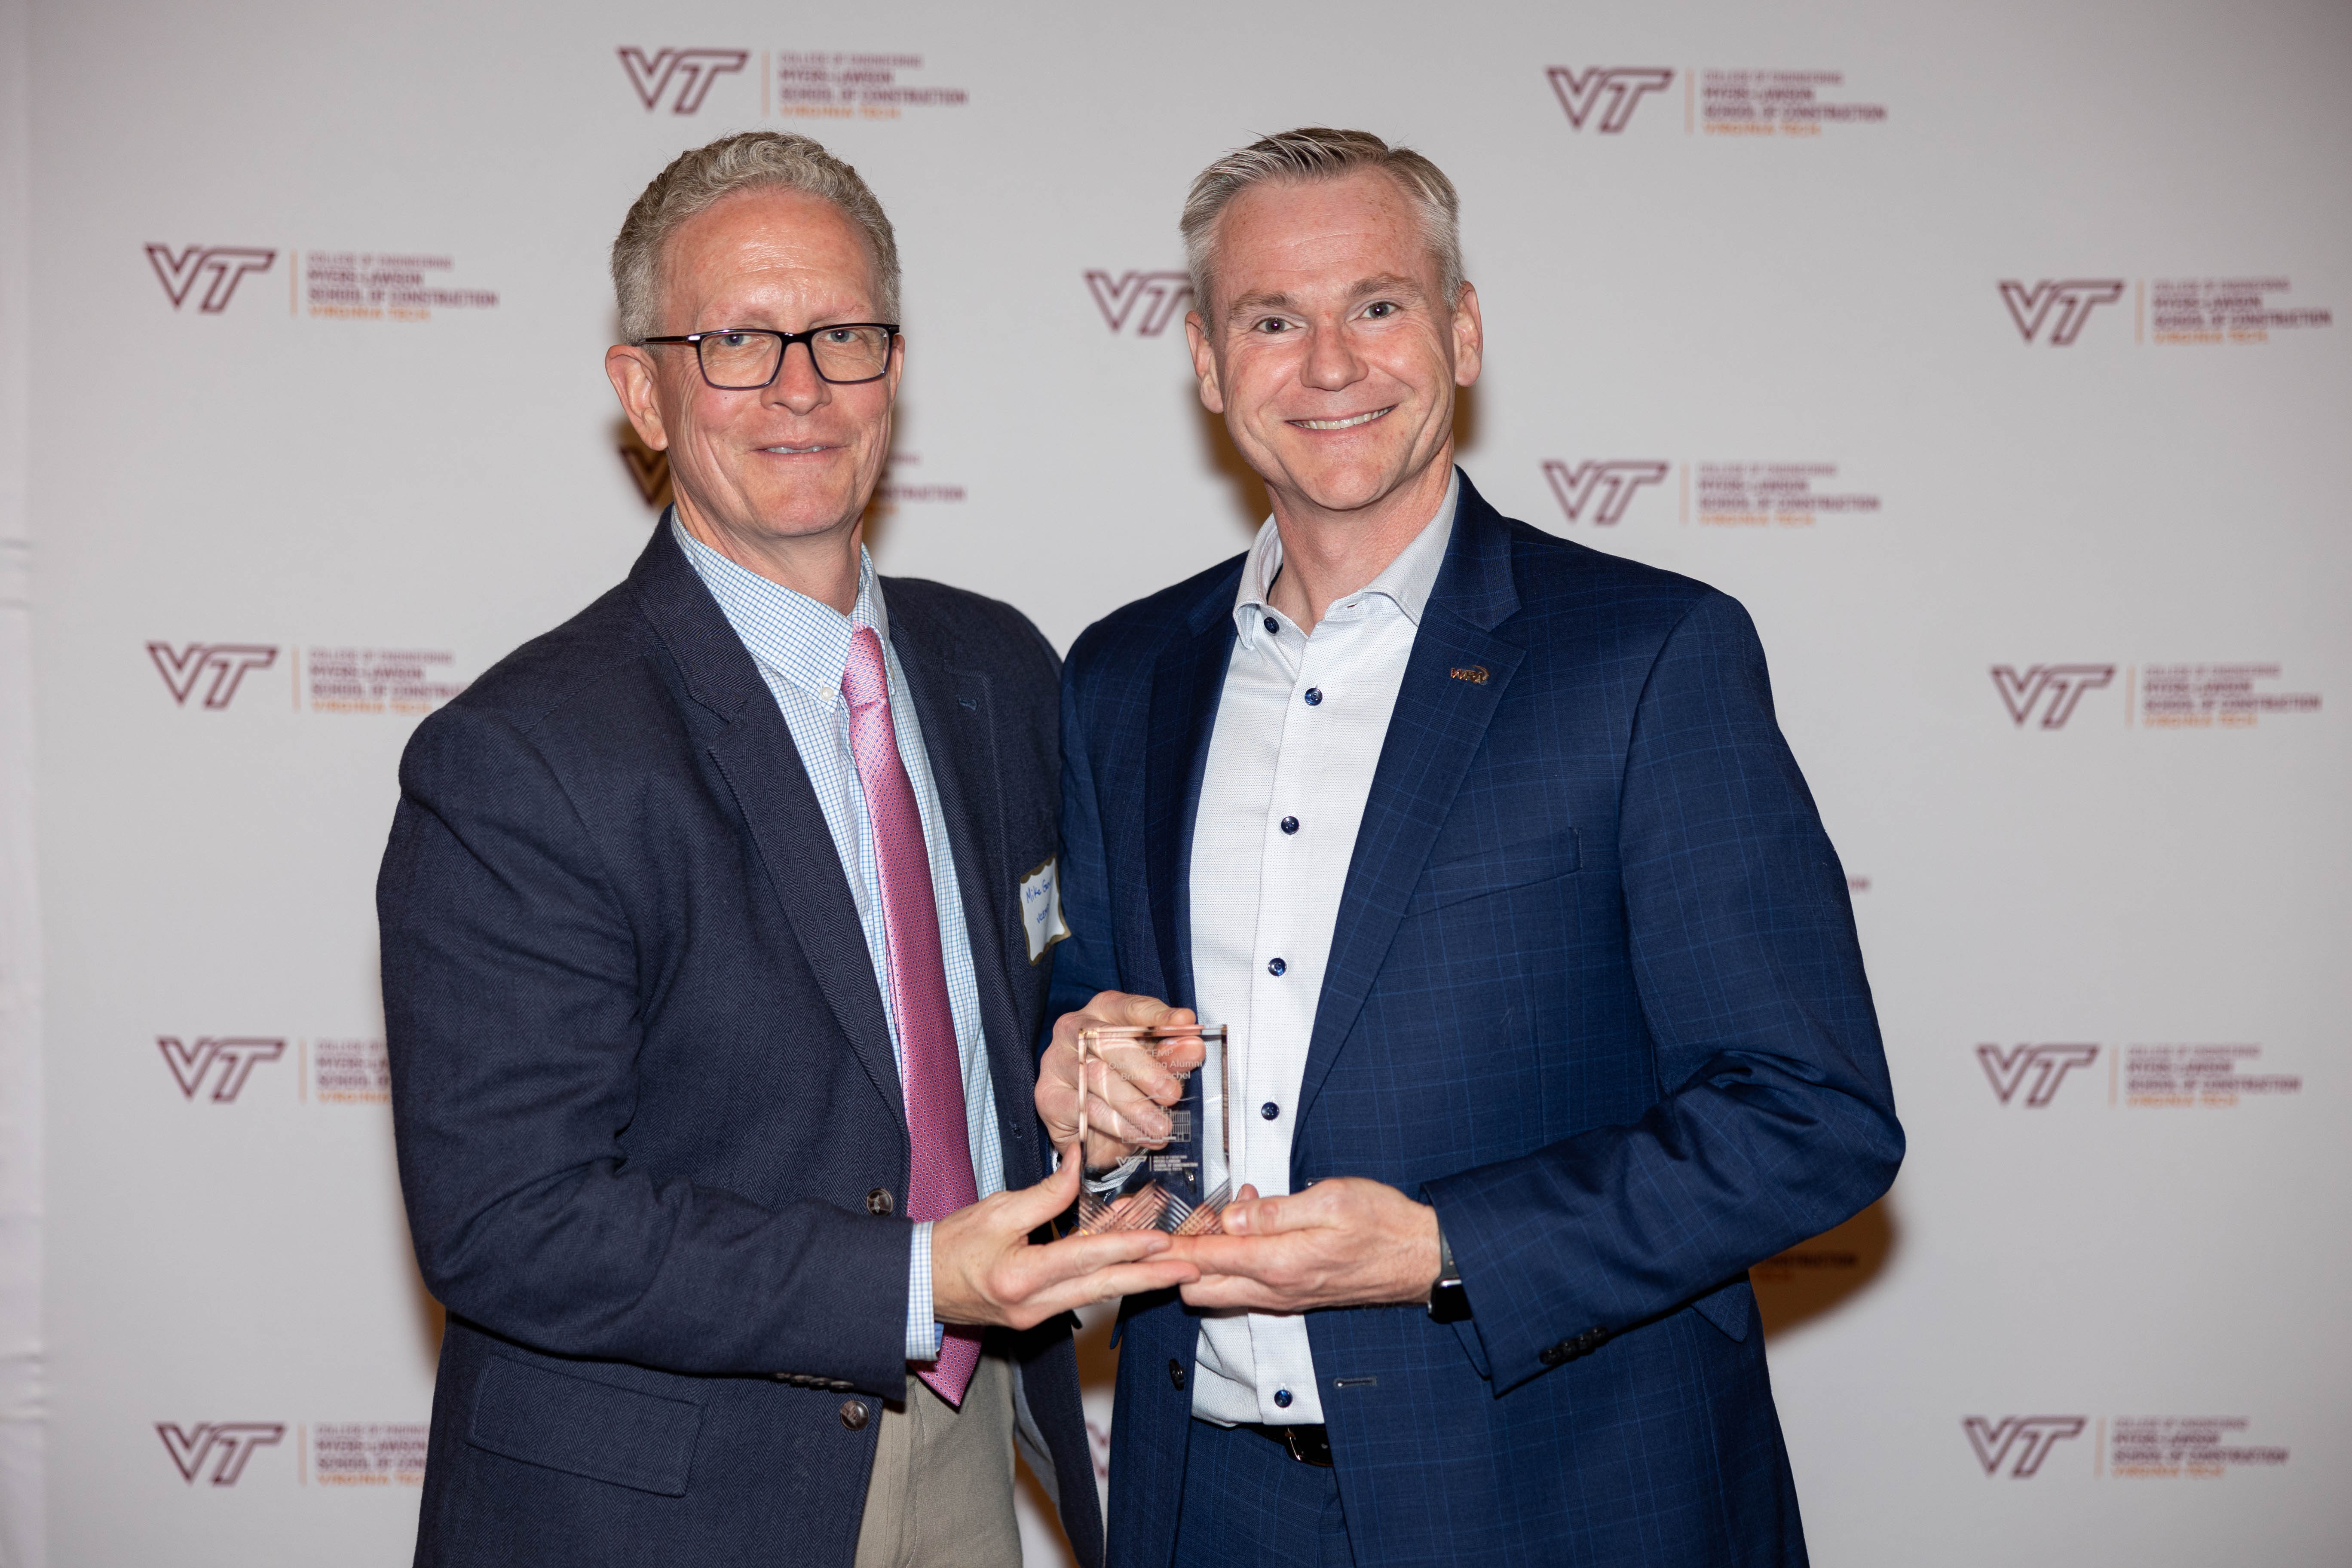 Michael Garvin (at left) with Brian Henschel ‘07. Photo by Will Drew for Virginia Tech.